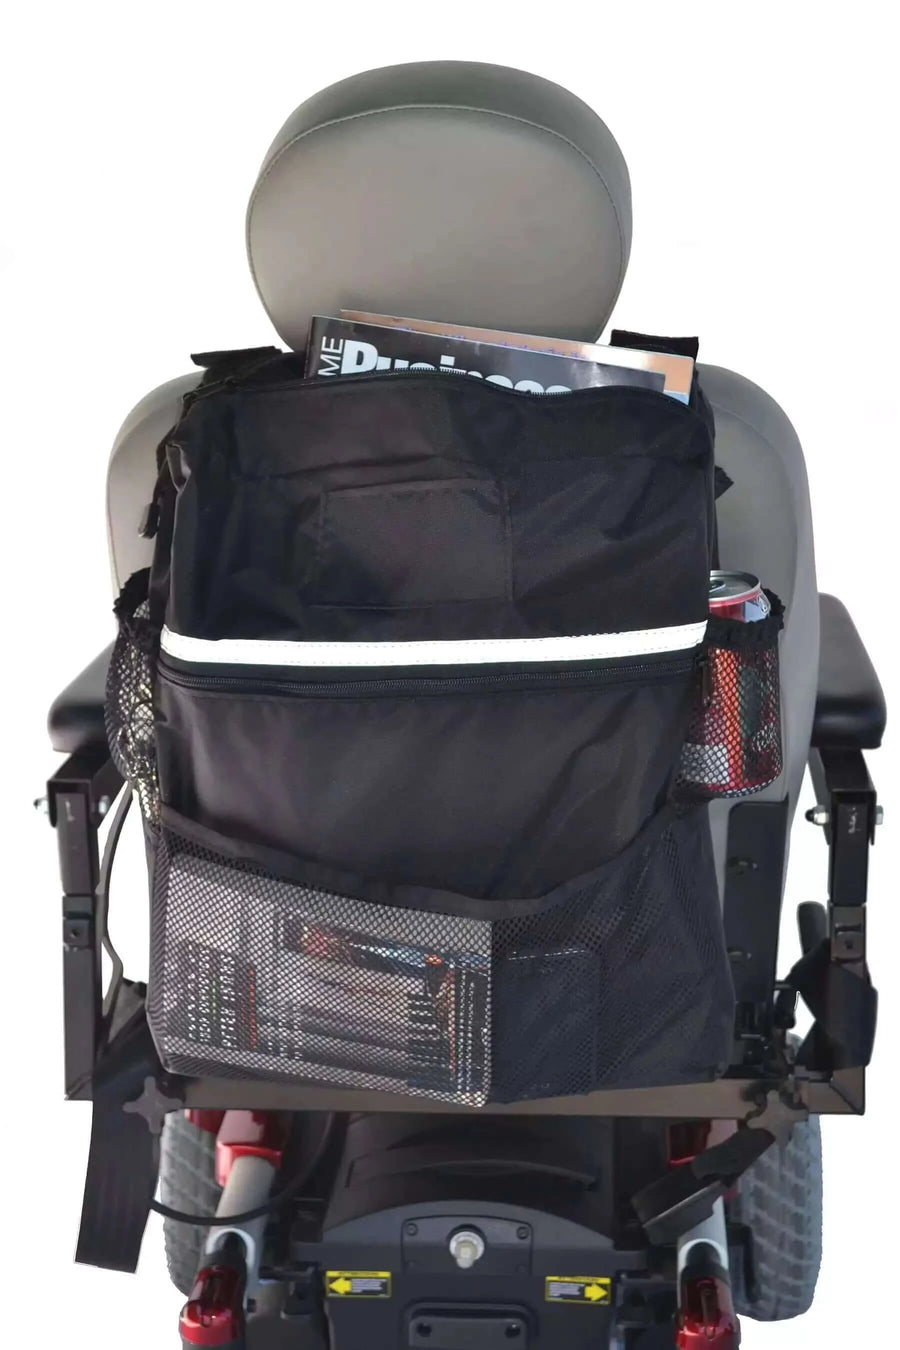 Diestco - Deluxe Seatback Bag for Mobility Equipment on scooter with white background